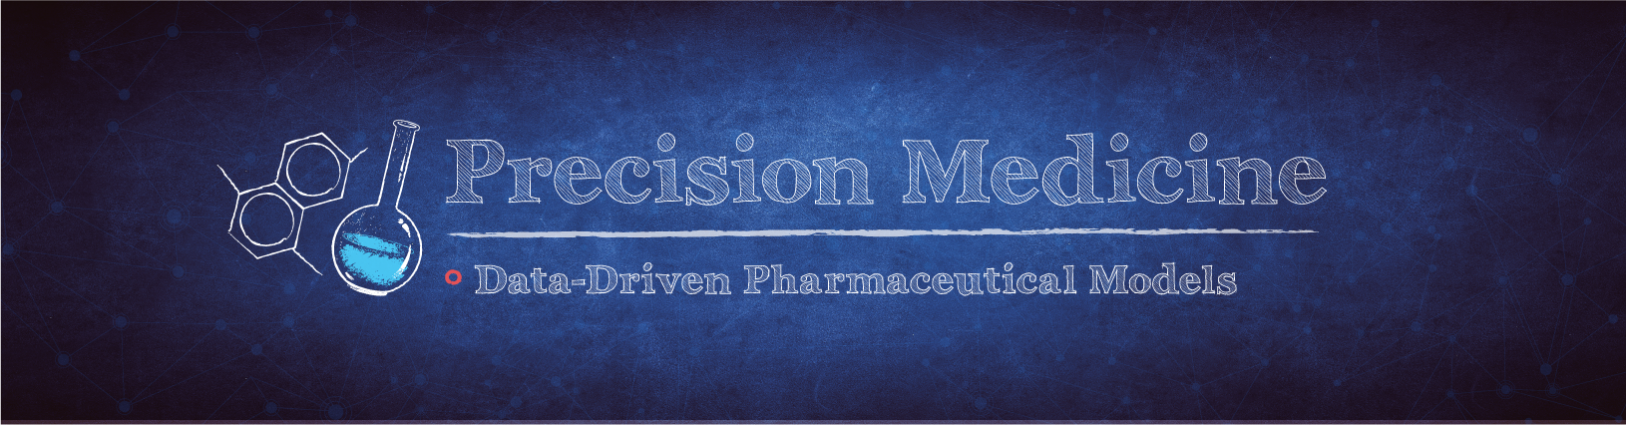 blue background with Precision Medicine: Data-Driven Pharmaceutical Models in text